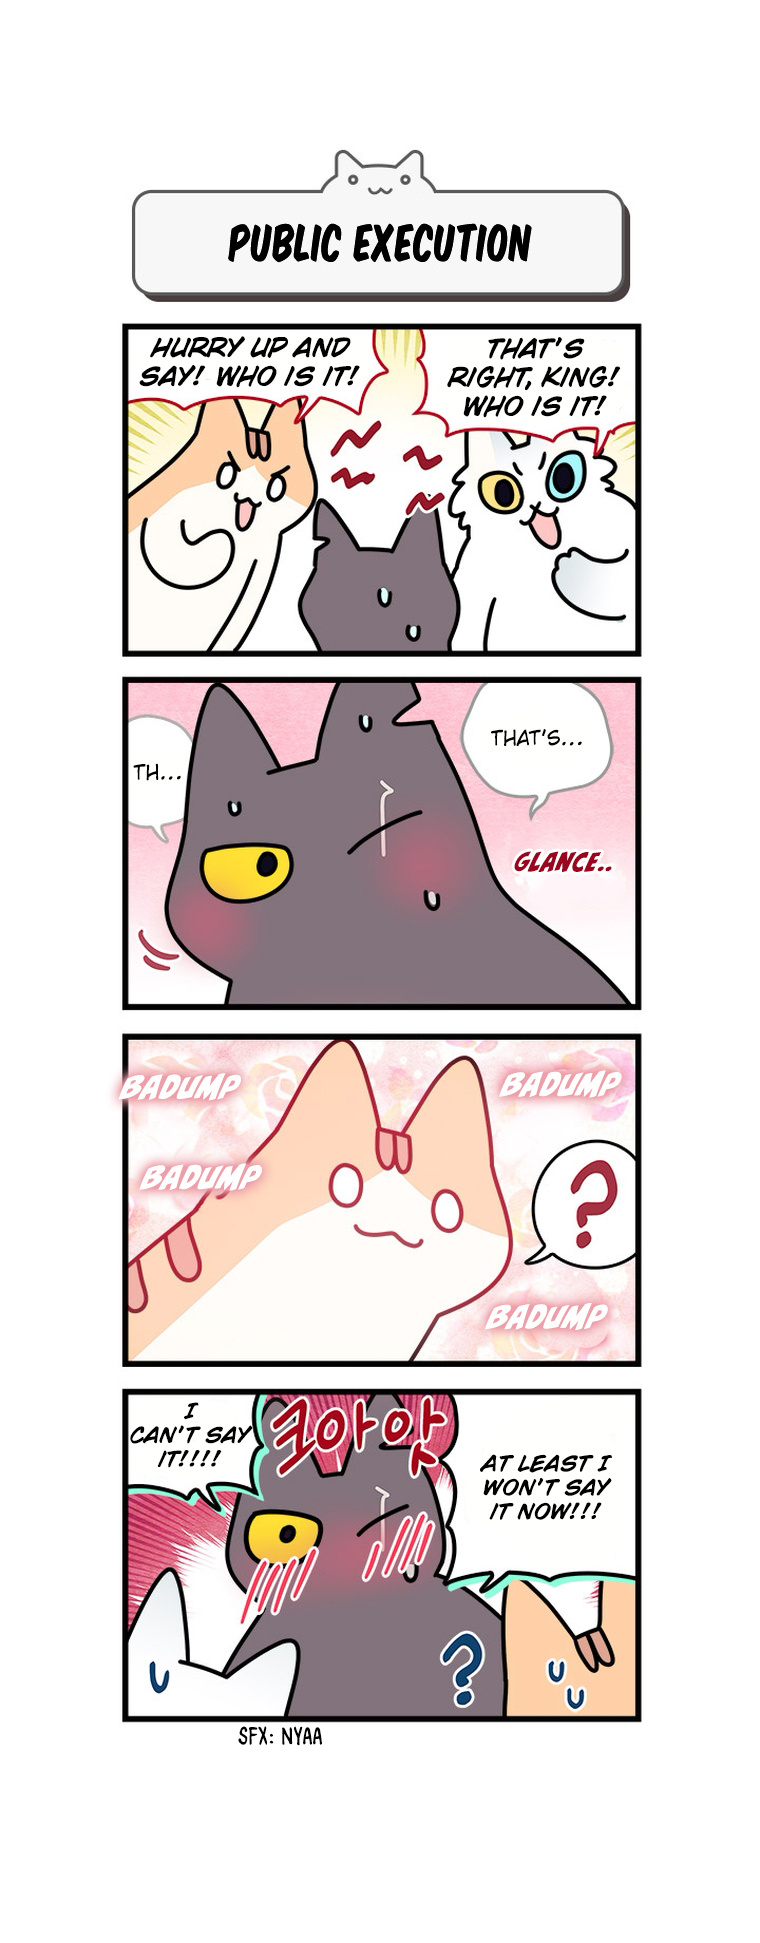 Cats Own The World - Page 2